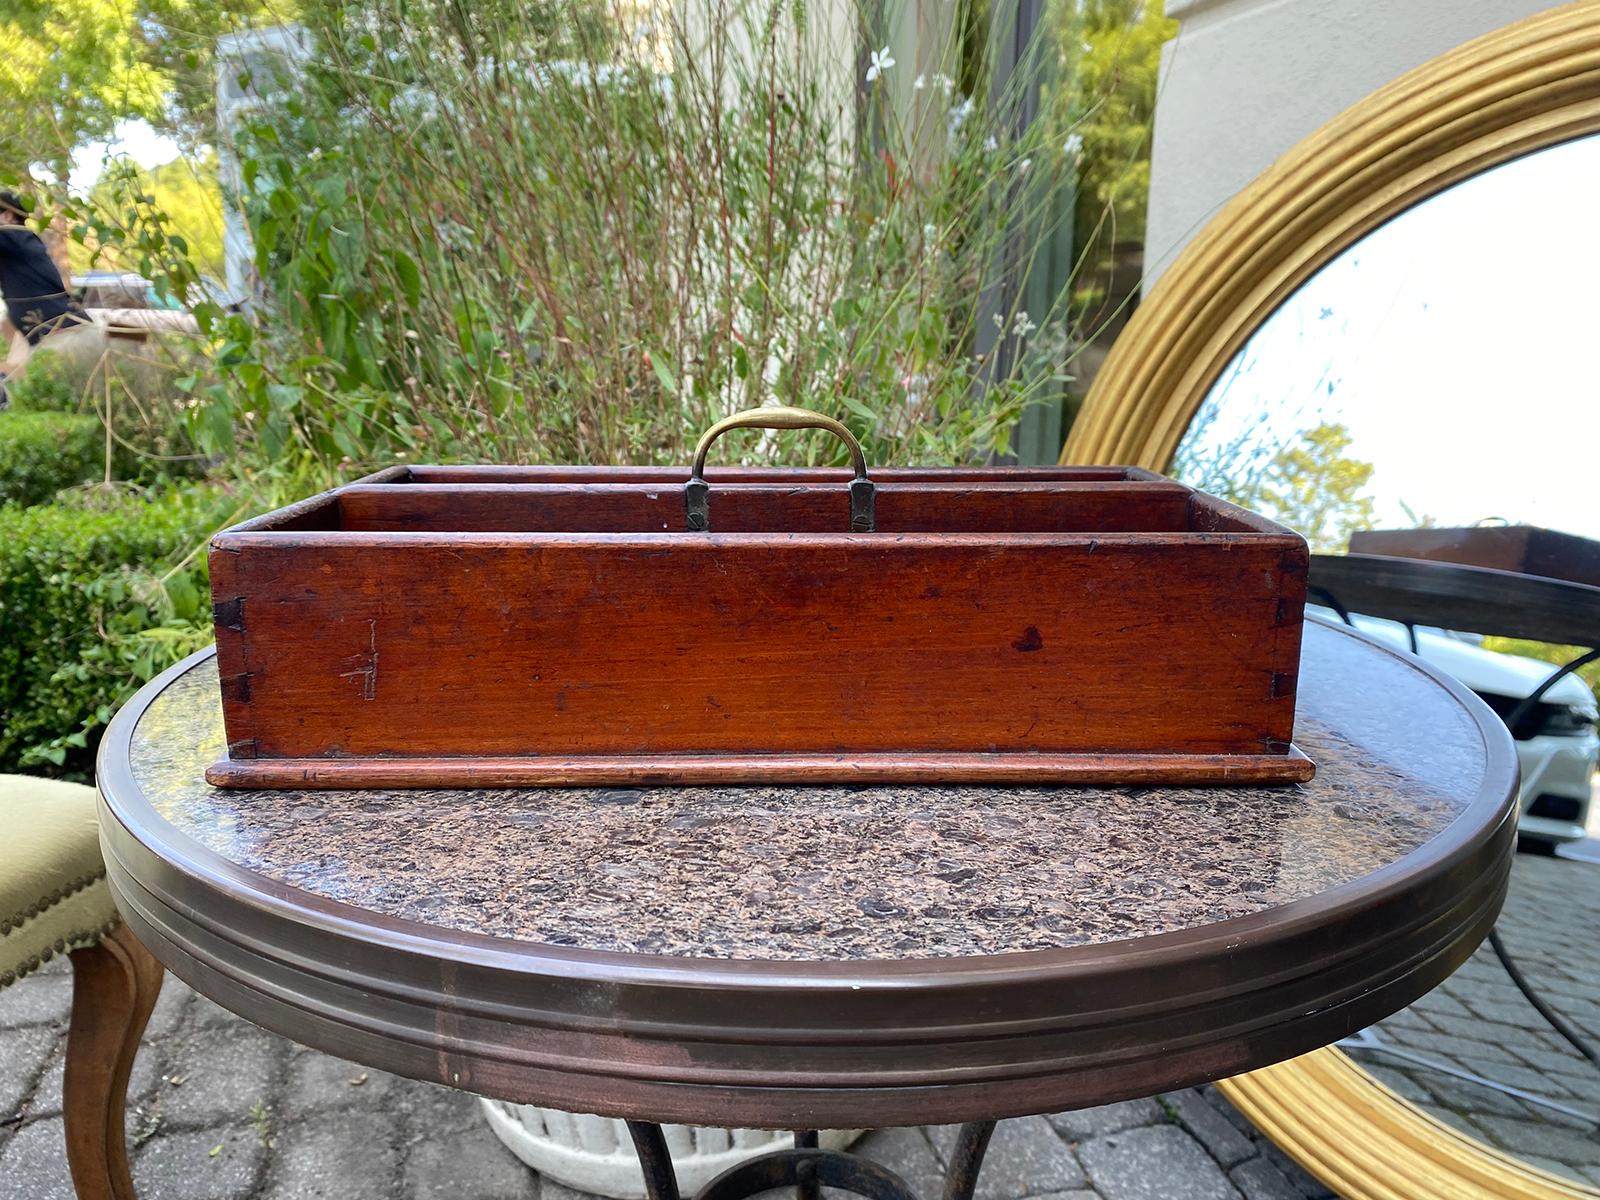 19th century wood cutlery tray / box with brass handle.